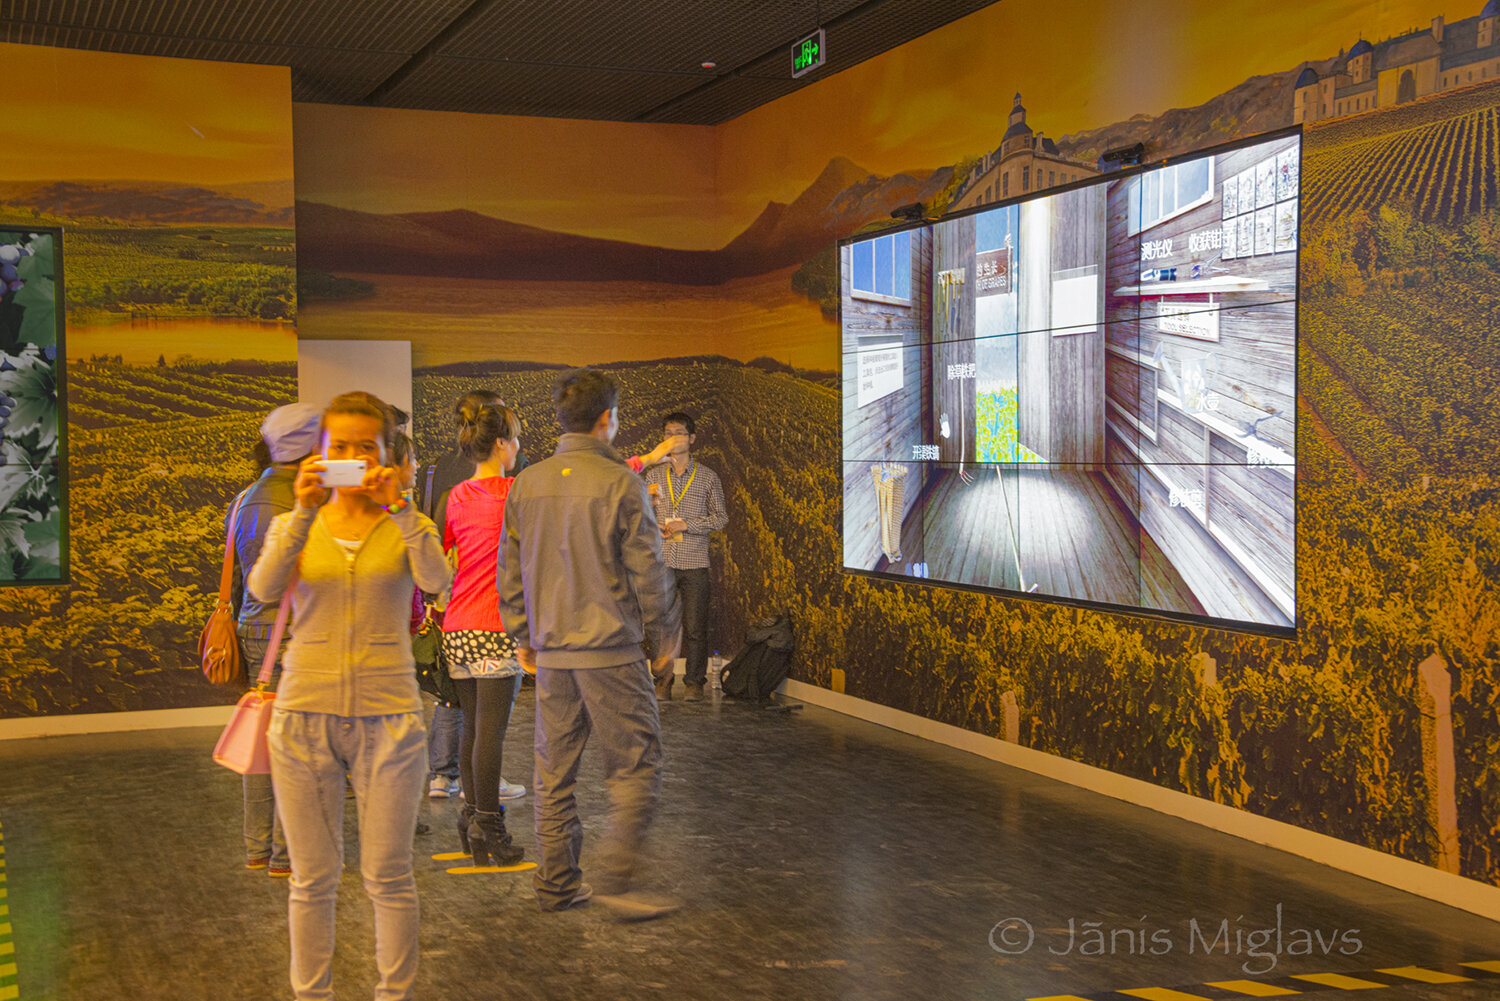 Chinese tourists play an interactive display while another visitor photographs the foreign photographer. 